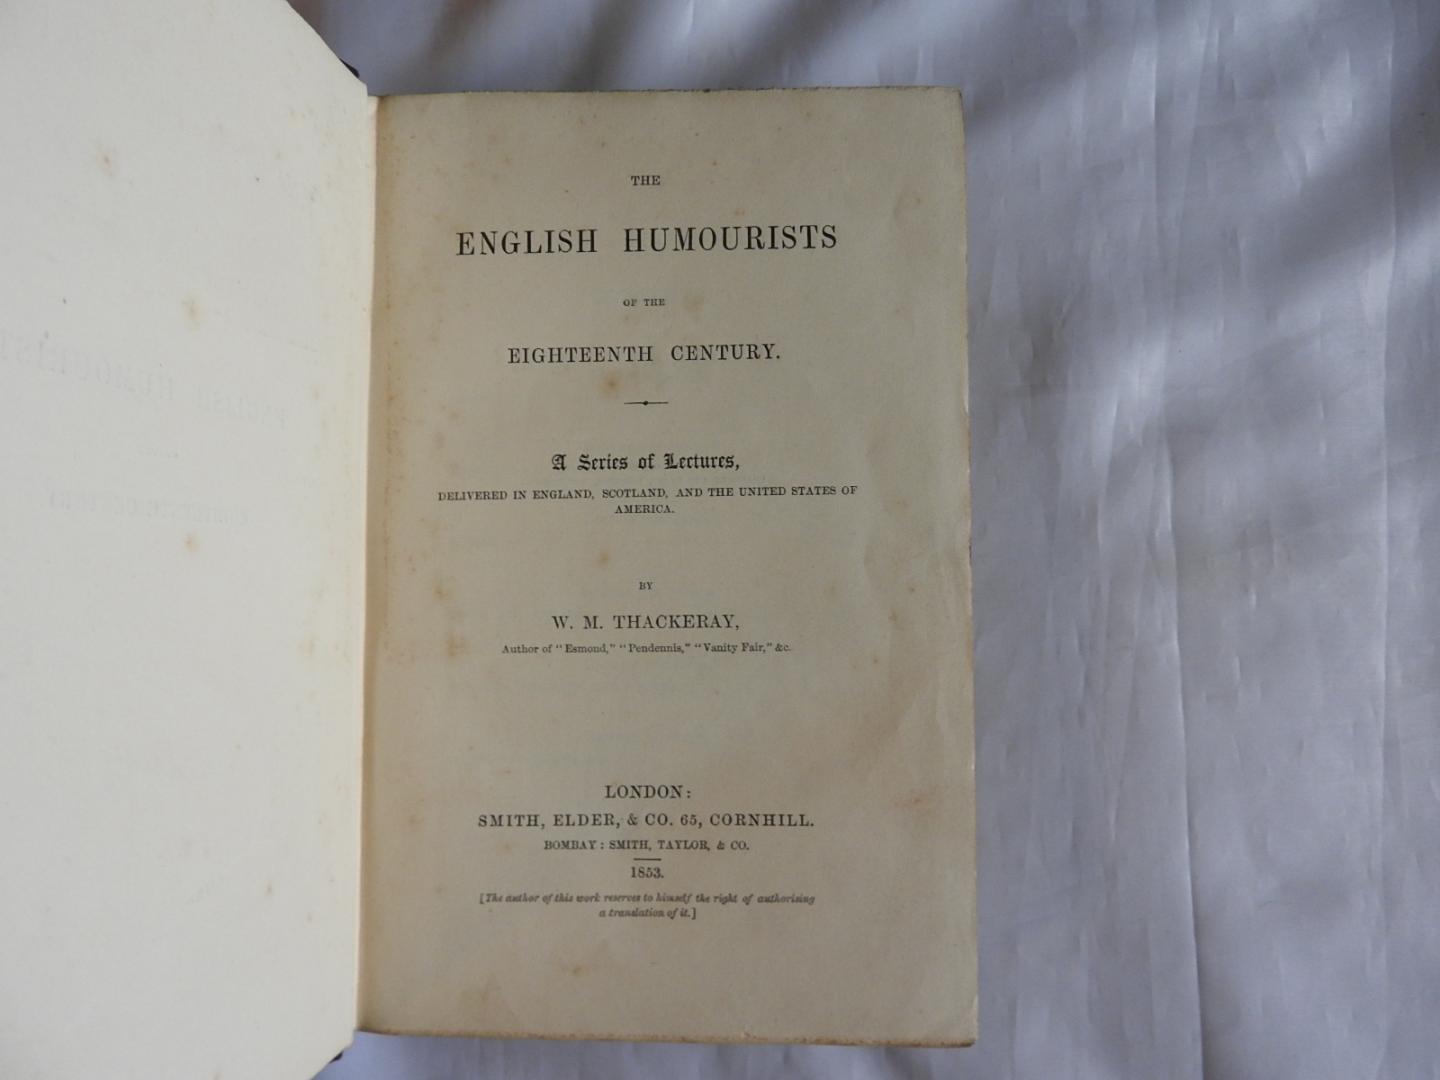 William Makepeace Thackeray W.M. 1811-1863 - the English Humourists of the Eighteenth Century a series of lectures dlivered in England, Scotland, and the united states of america.